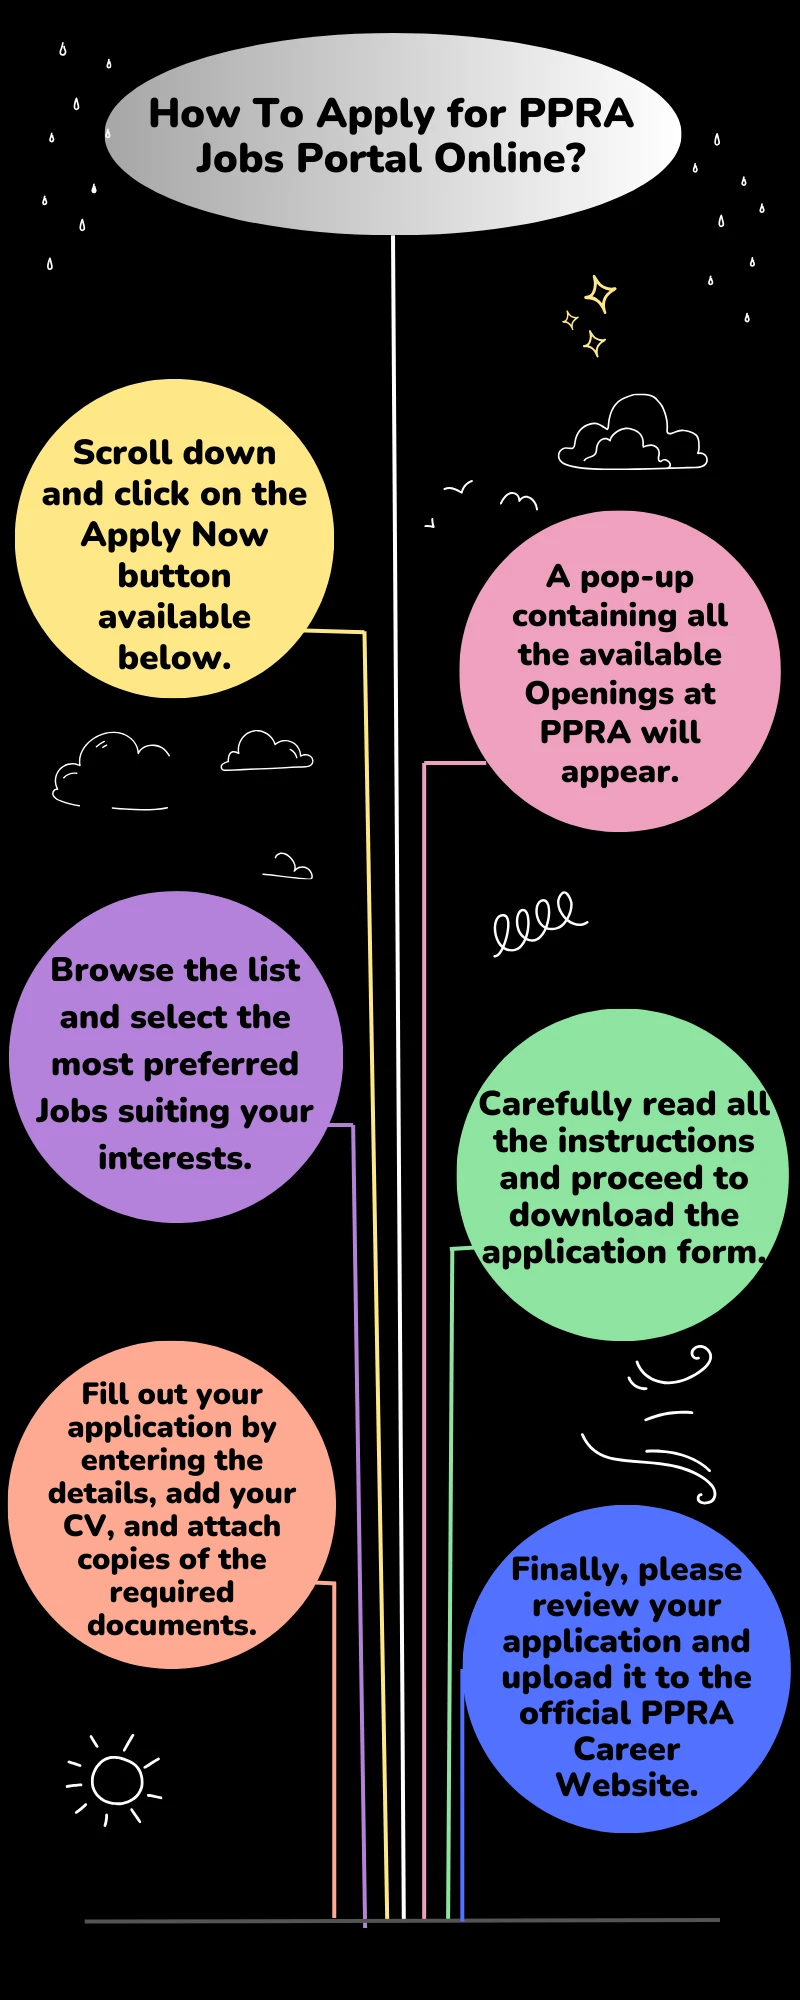 How To Apply for PPRA Jobs Portal Online?